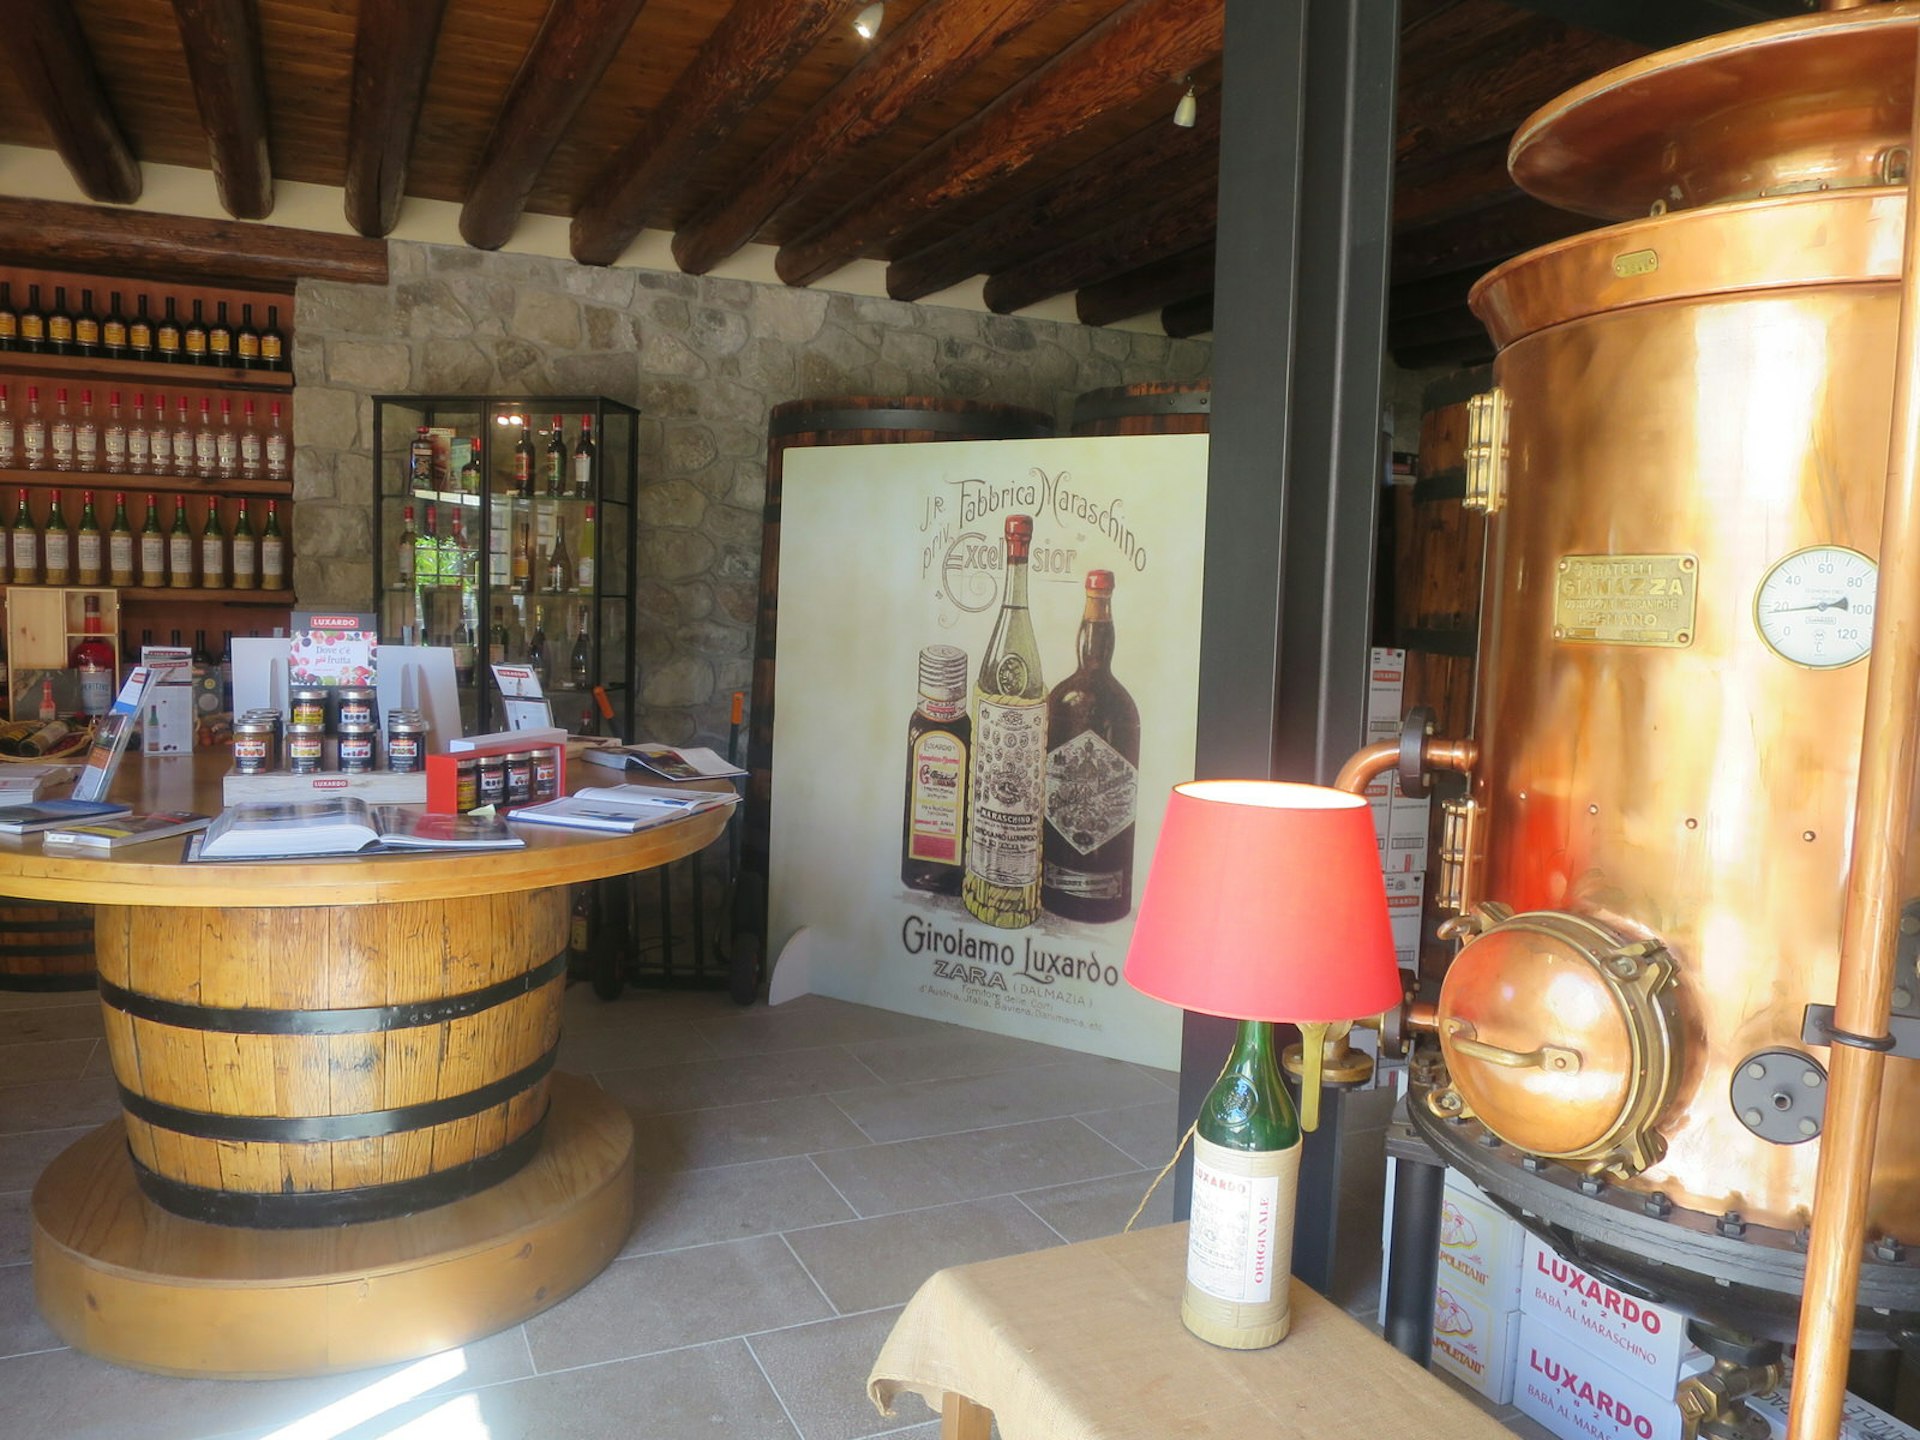 The Luxardo shop inside a former farmhouse. A large copper still is on the right with products displayed on a huge barrel turned into a table and shelves on the right-hand side